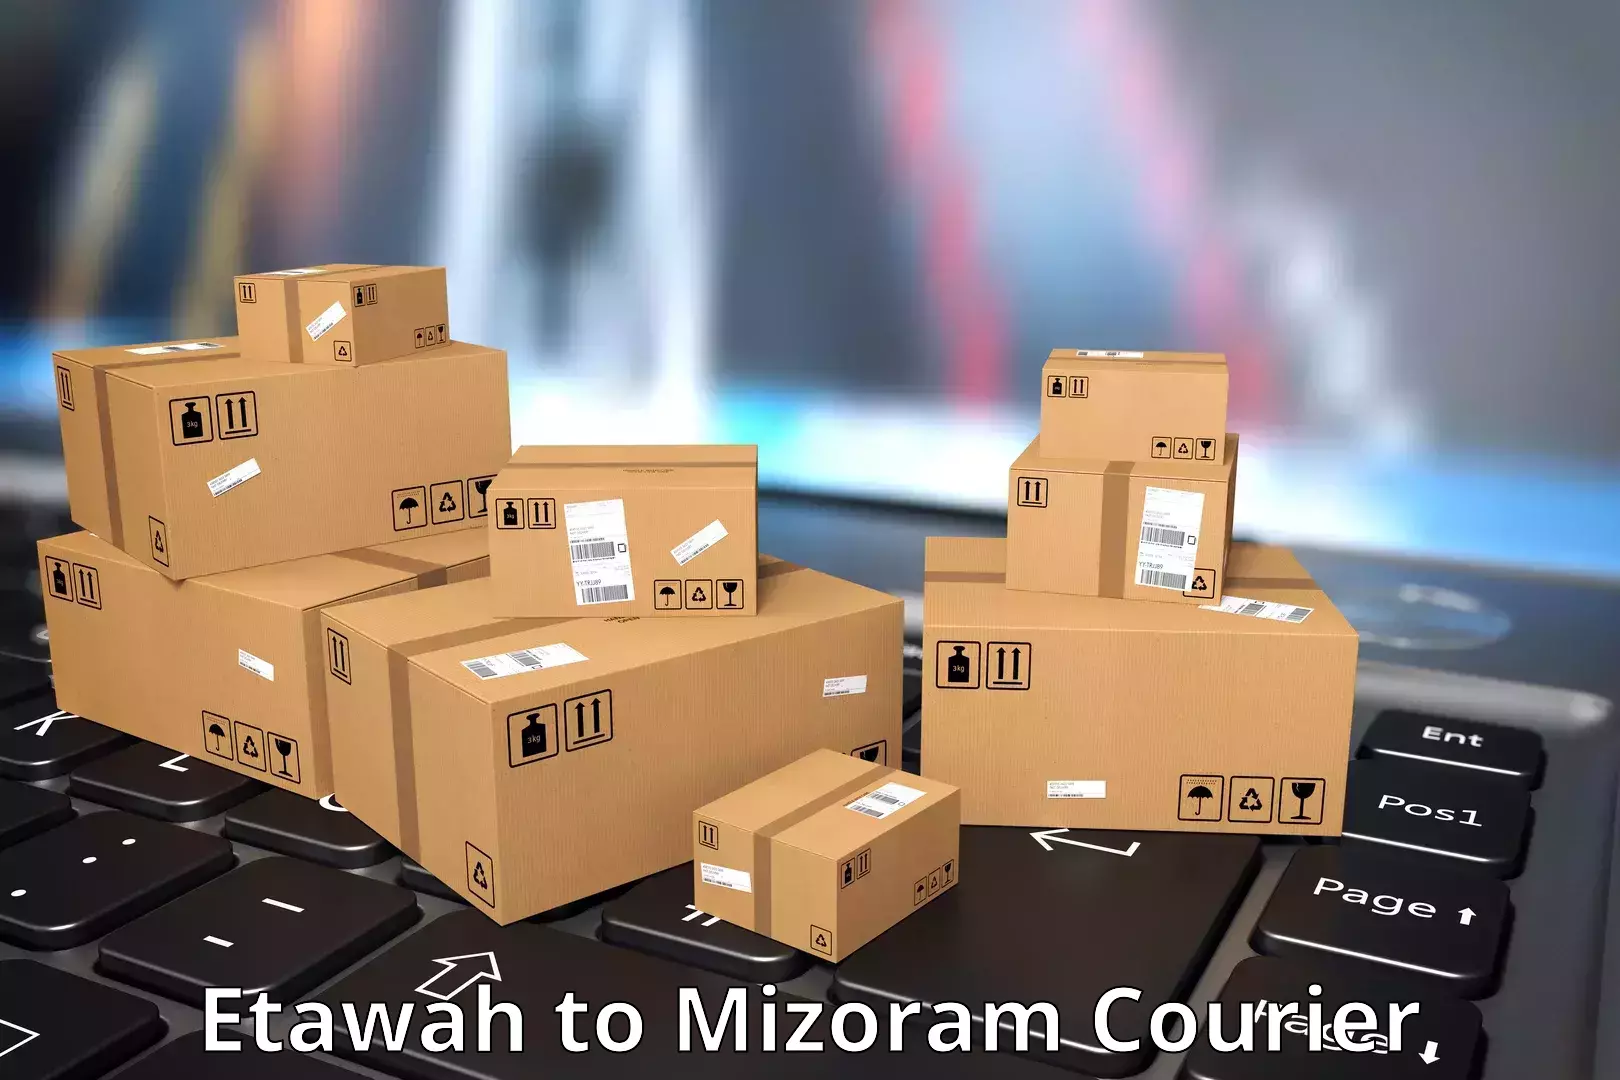 Subscription-based courier Etawah to Darlawn